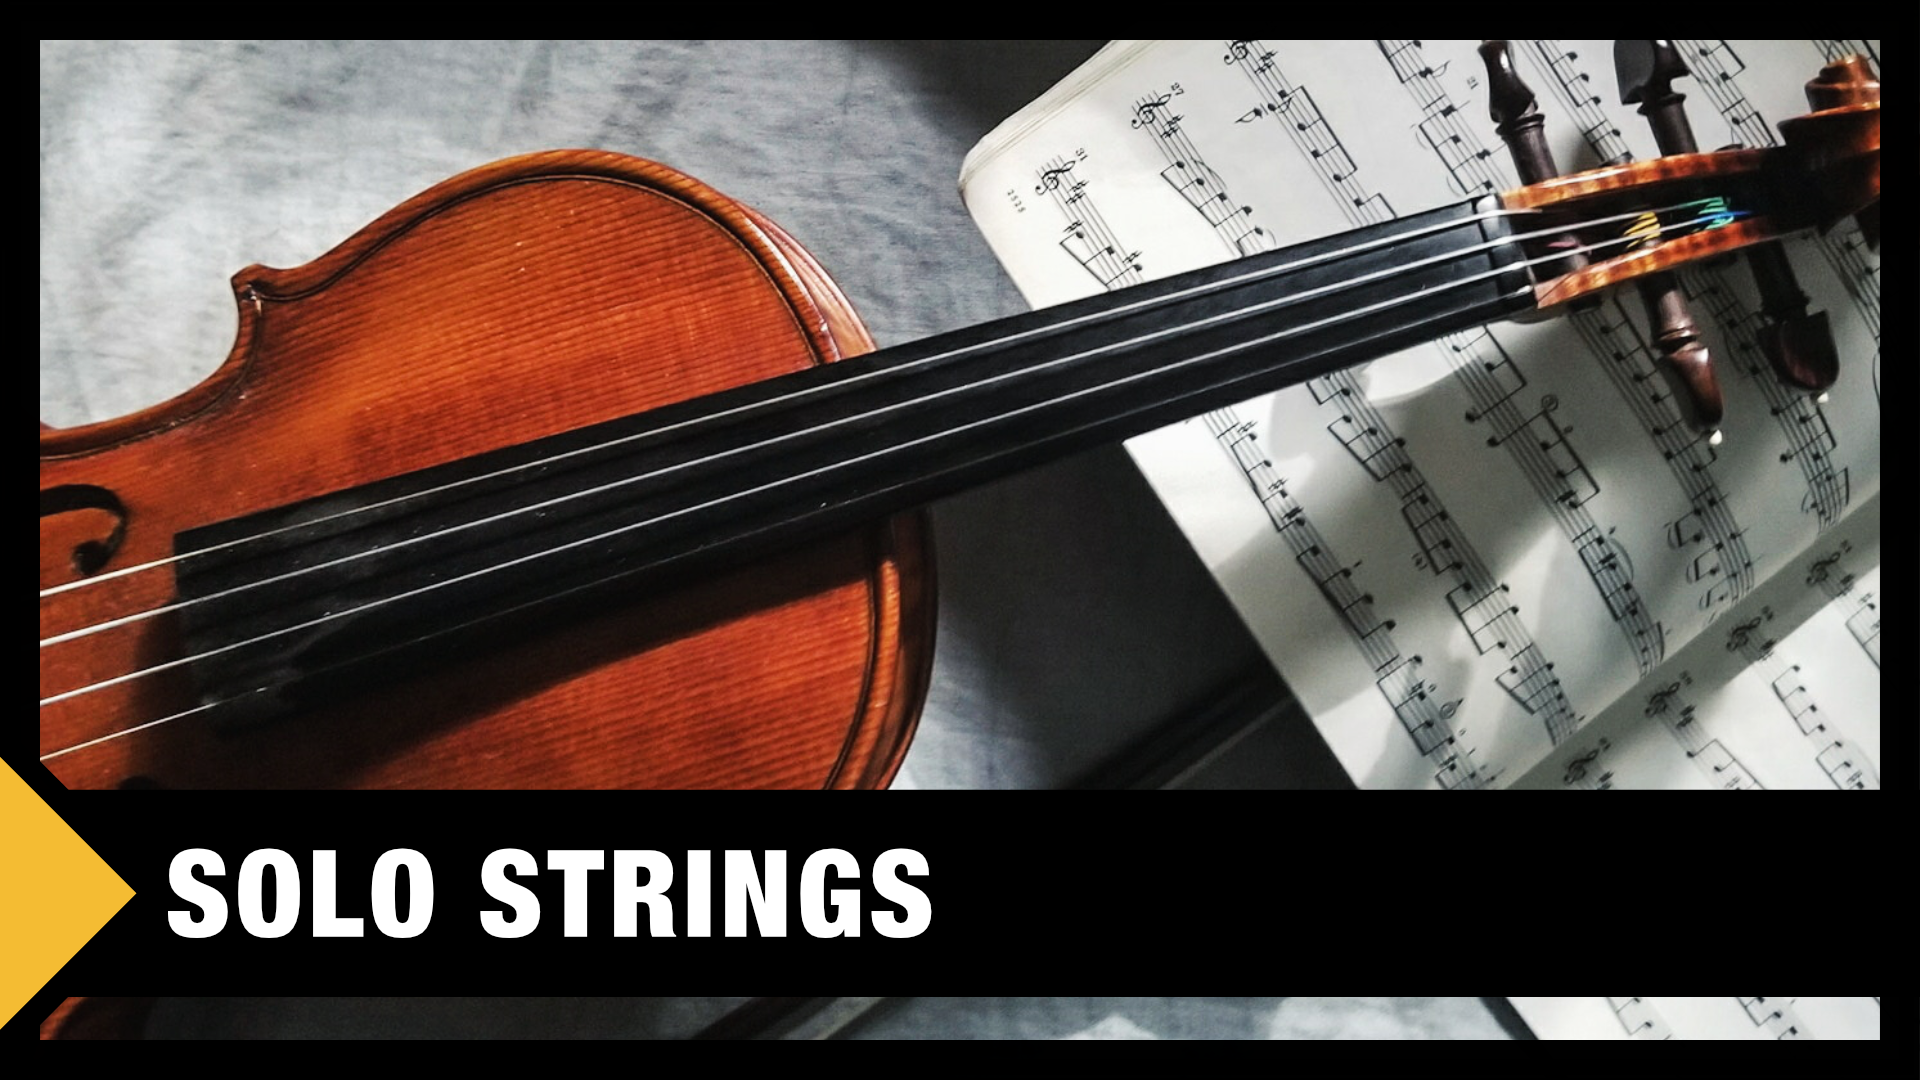 Spitfire solo strings library